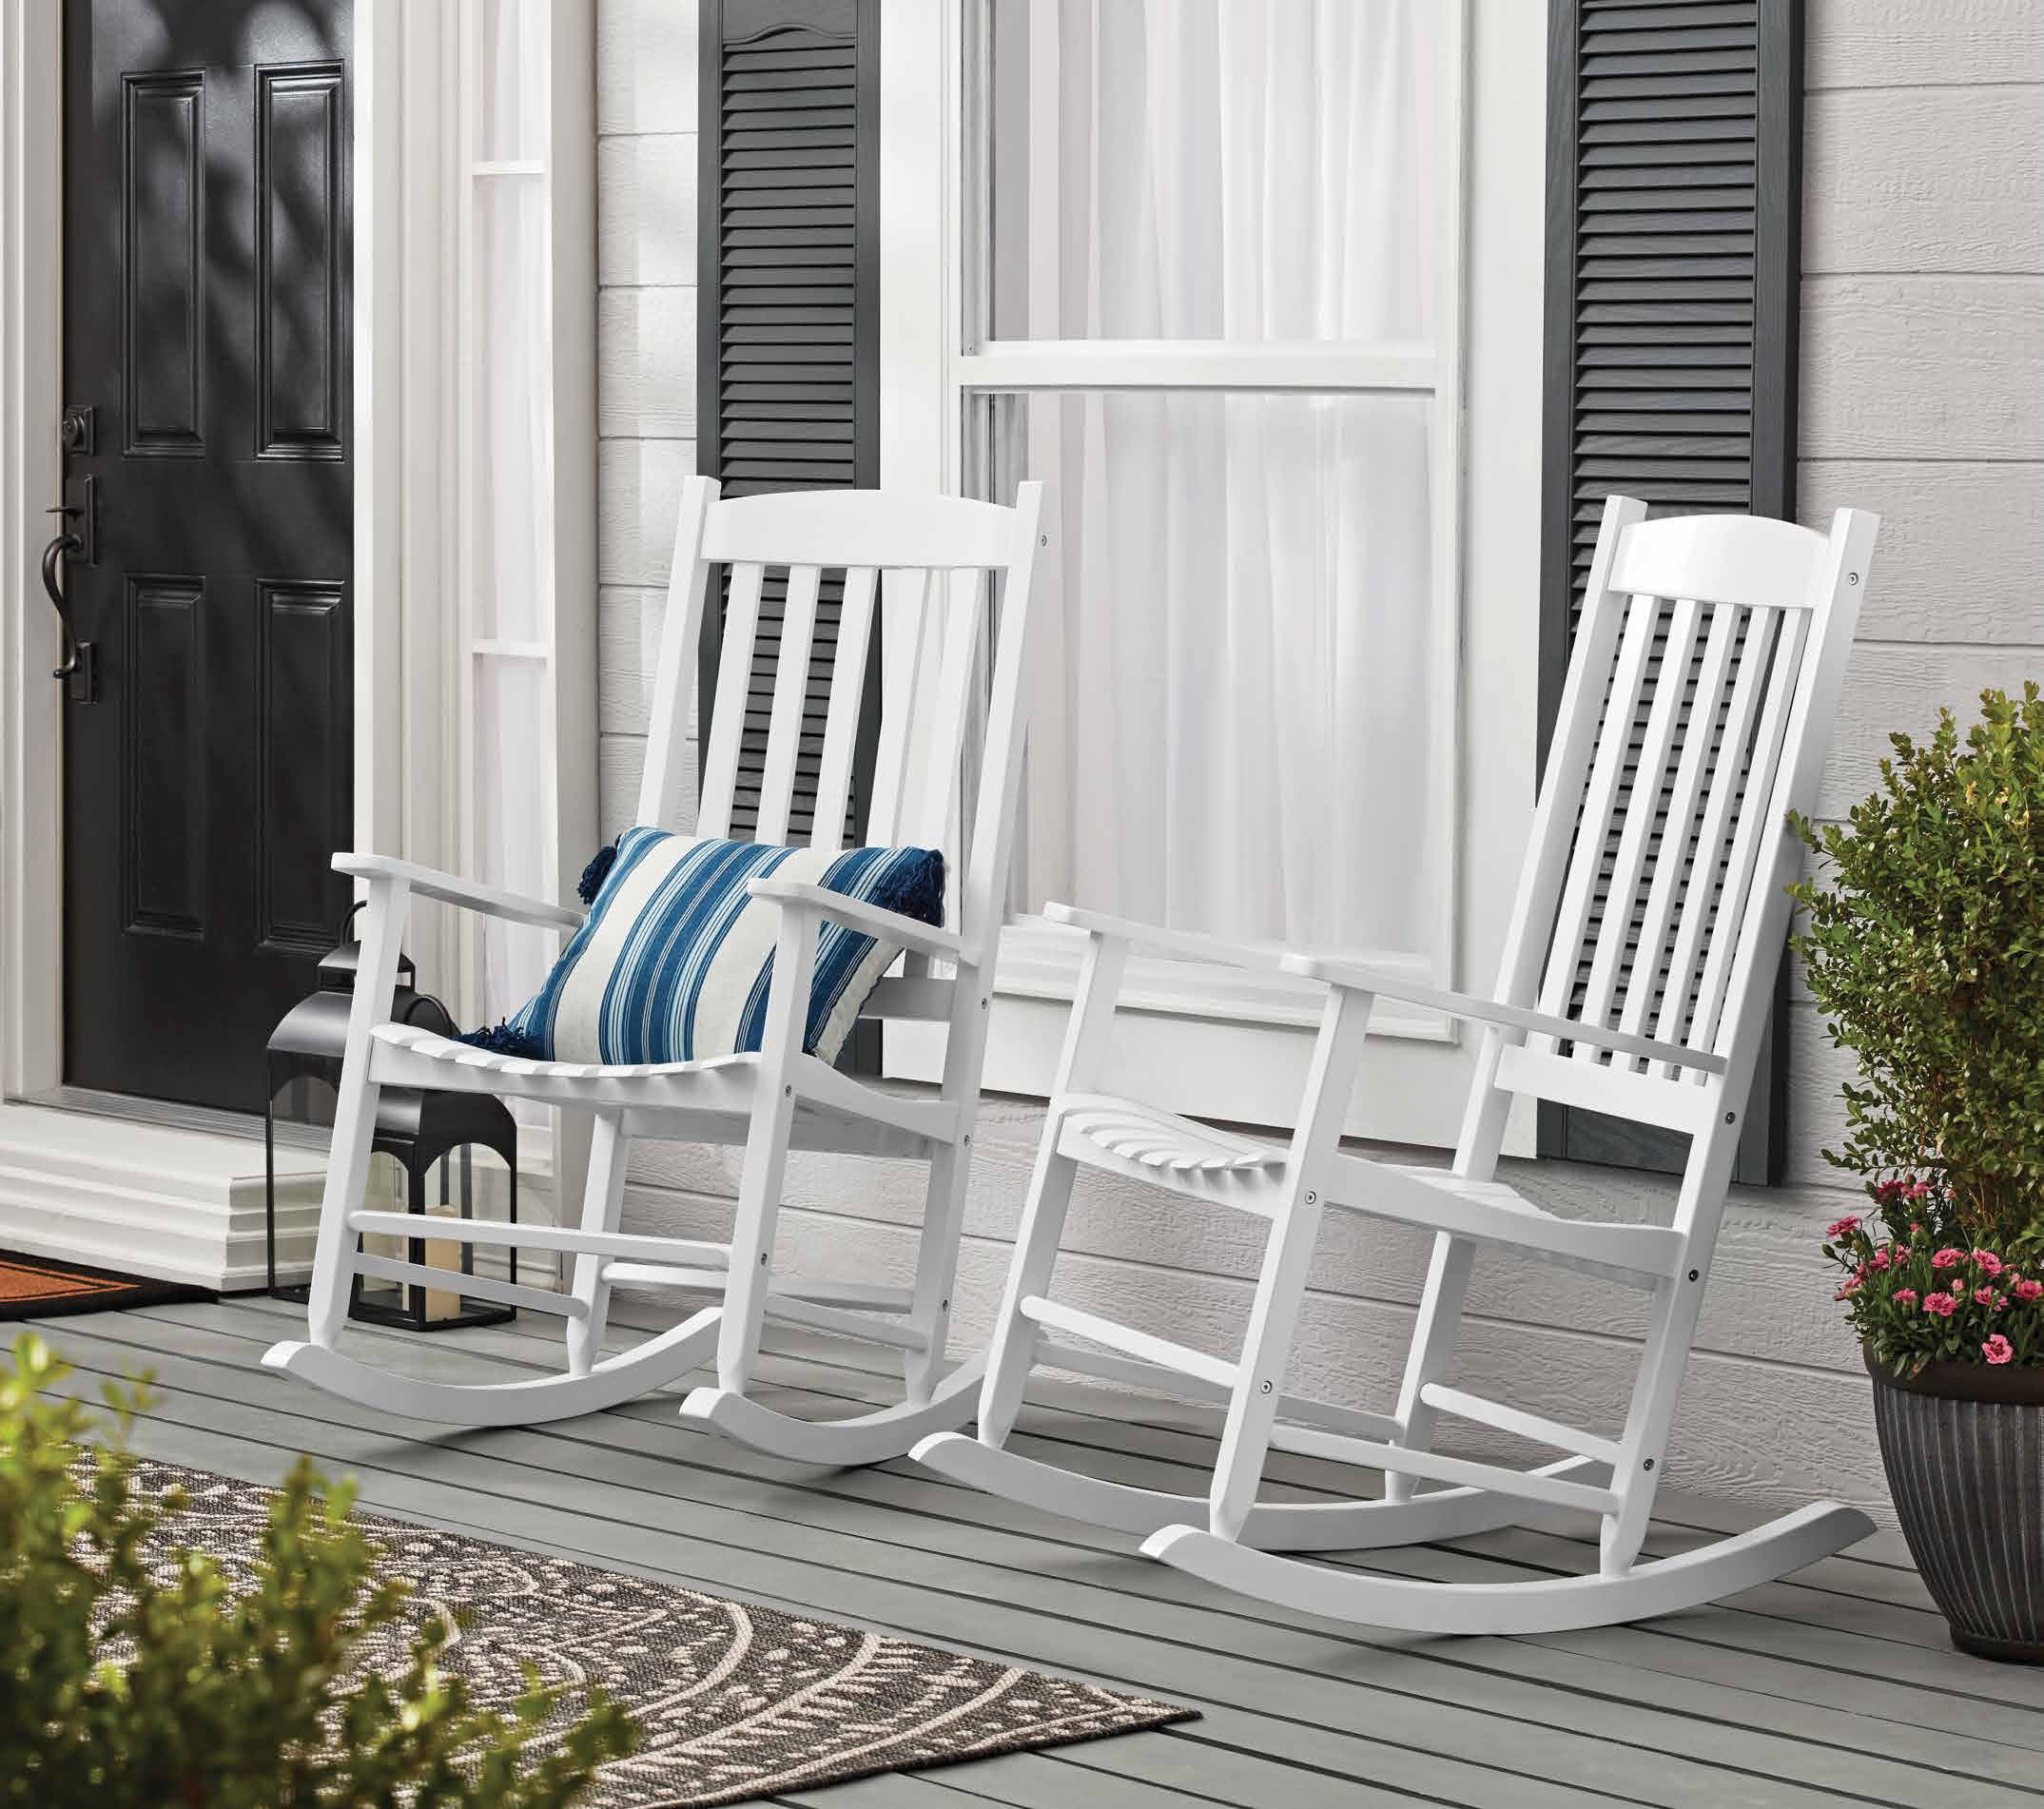 Details about   Porch Wood Rocking Chair Outdoor Indoor Patio Wooden Comfort Multiple Color Yard